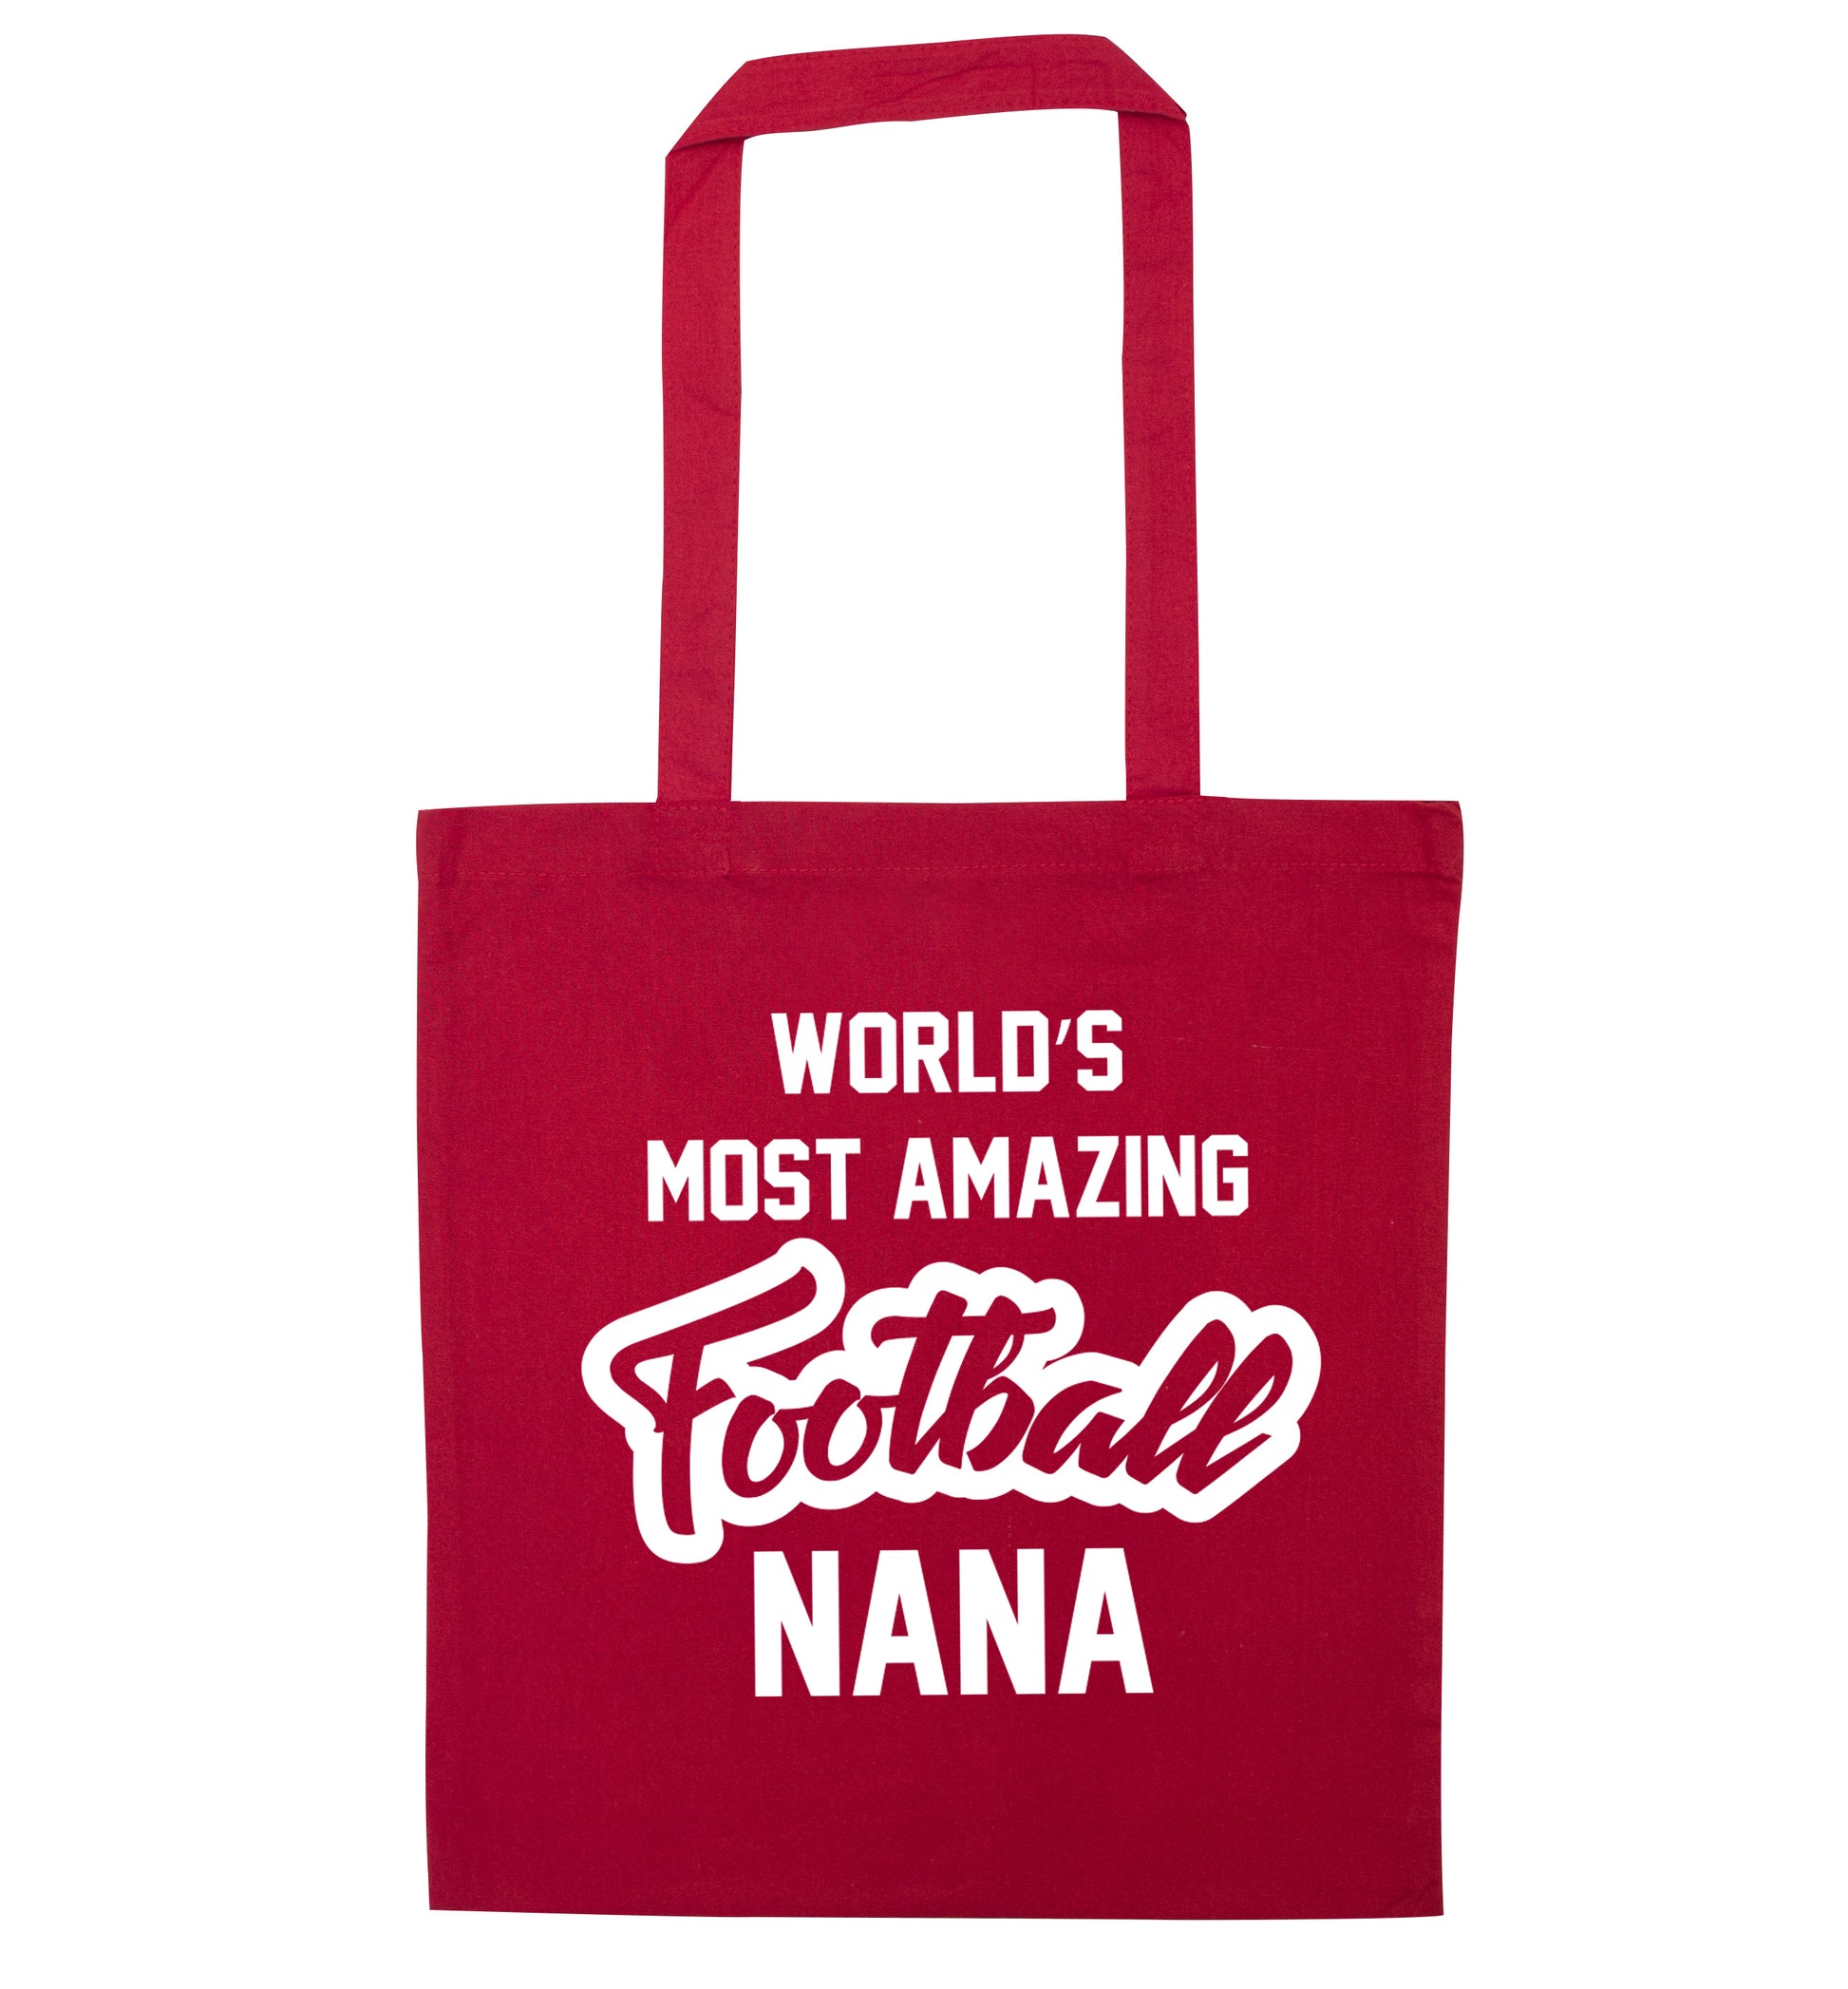 Worlds most amazing football nana red tote bag